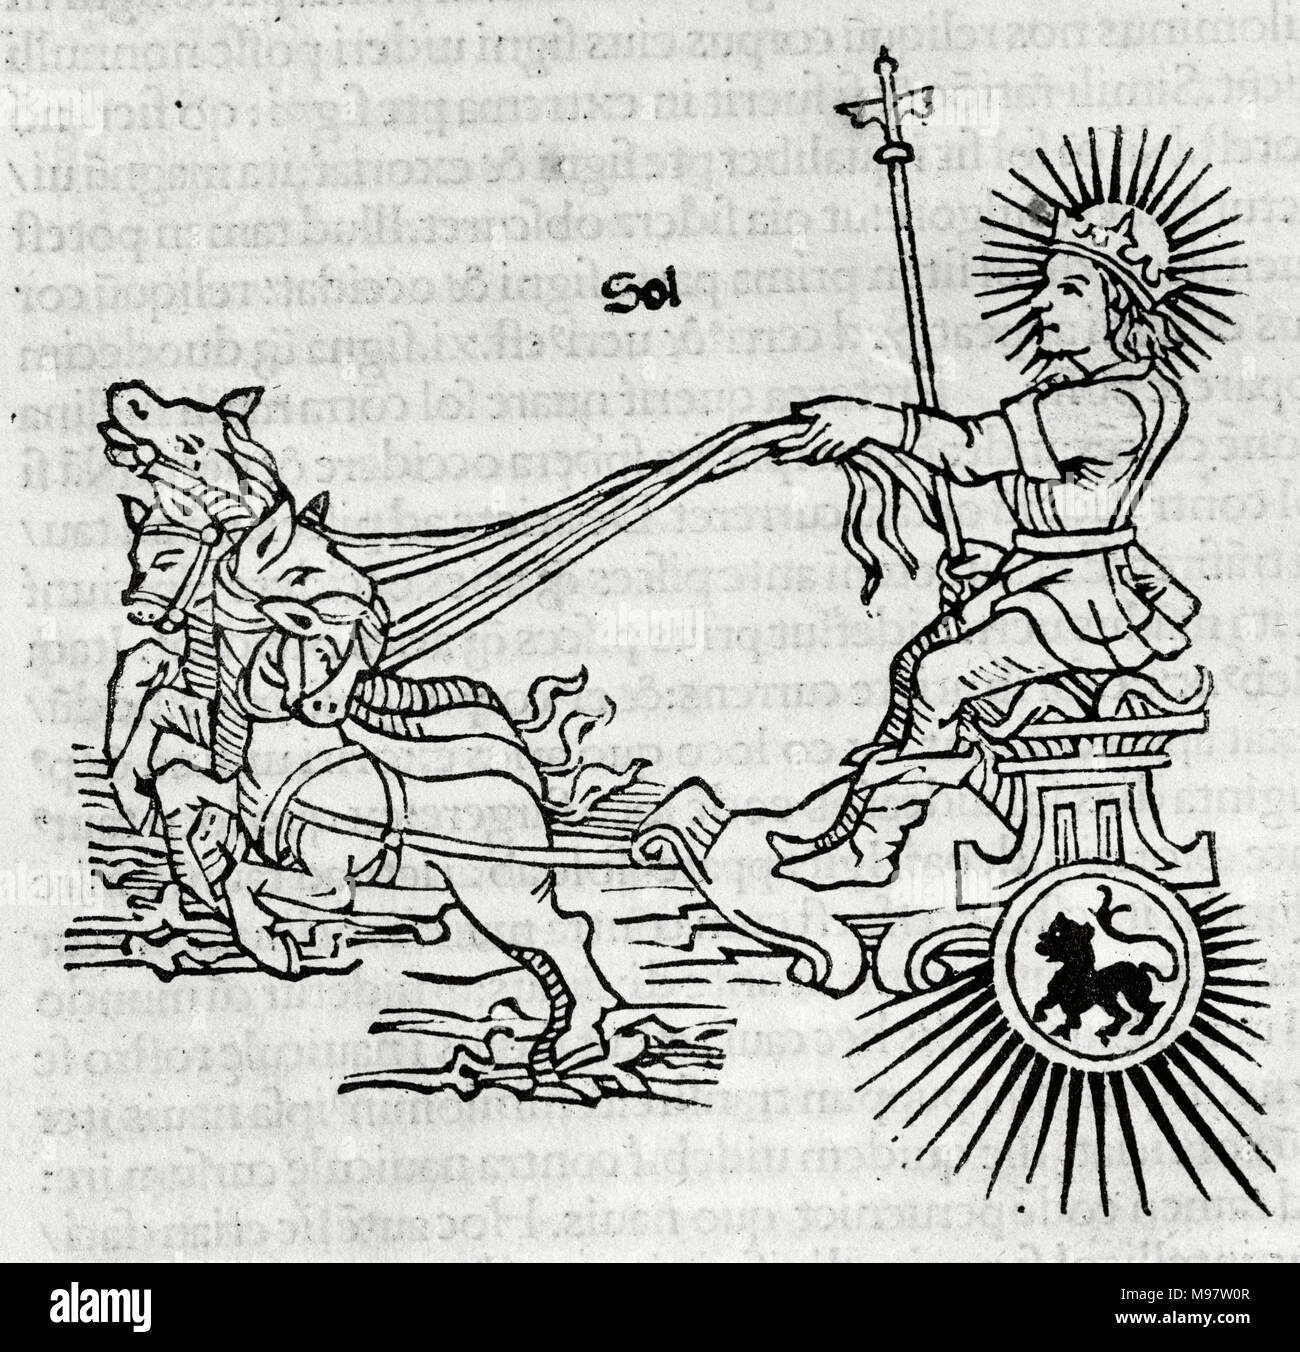 Helios. Personification of the Sun. Depicted as a young man riding a chariot pulled by four horses and with a crown of lightning. Engraving from Astronomicon, by the Latin author Gaius Julius Hyginus (64 BC-17 AD). Incunabula 283. Published in Venice, 1485. Stock Photo